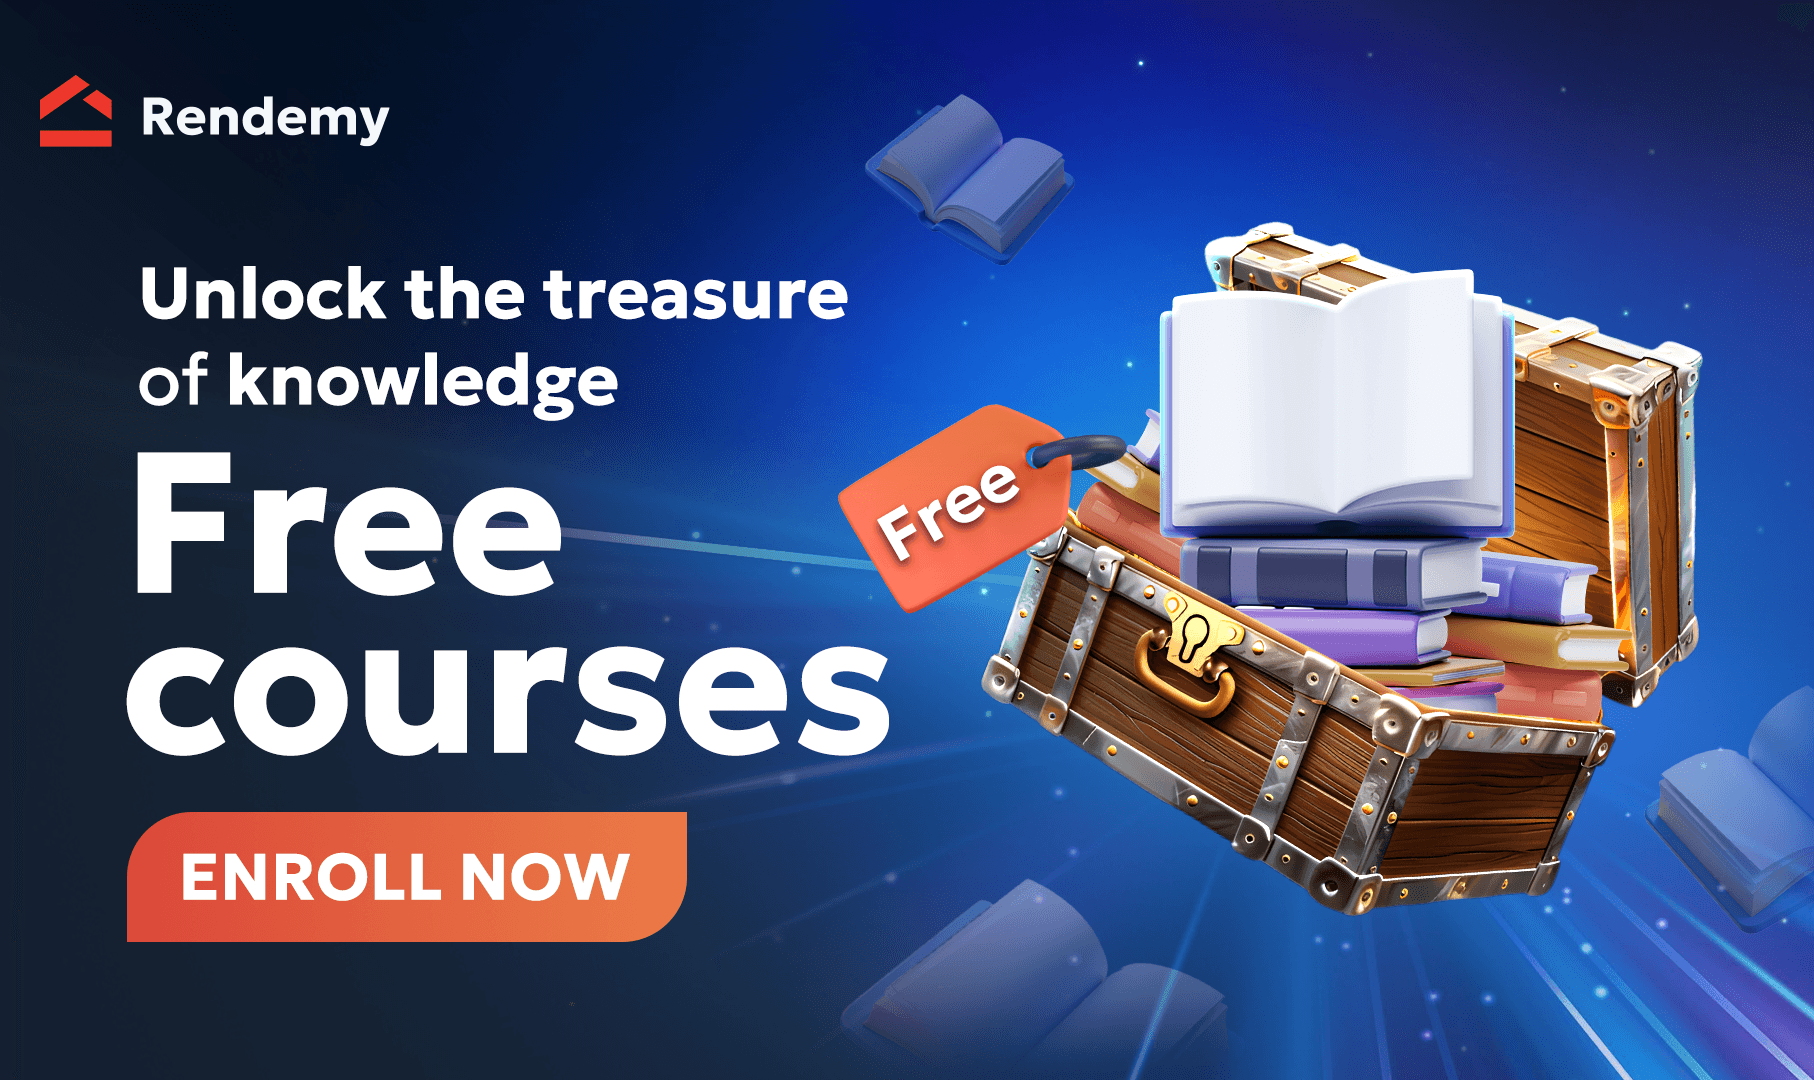 Enjoy over 100 FREE courses at Rendemy avatar